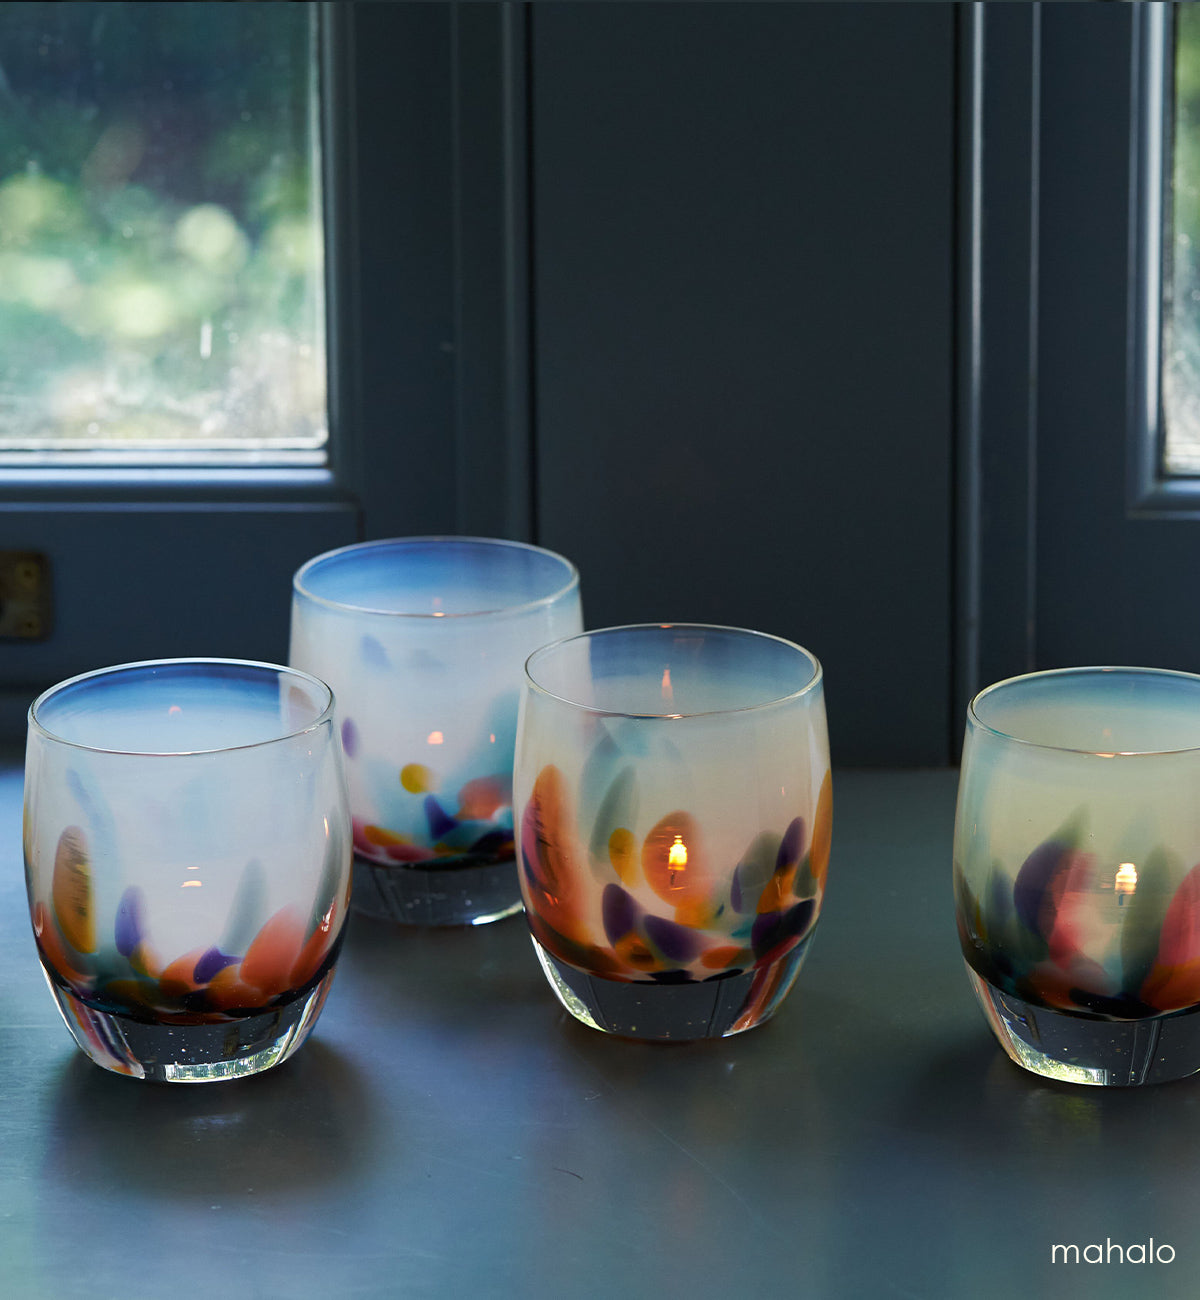 four mahalo, white with multi-colored yellow, pink, teal, purple and green petals hand-blown glass votive candle holders lit with tealights on a blue grey windowsill.